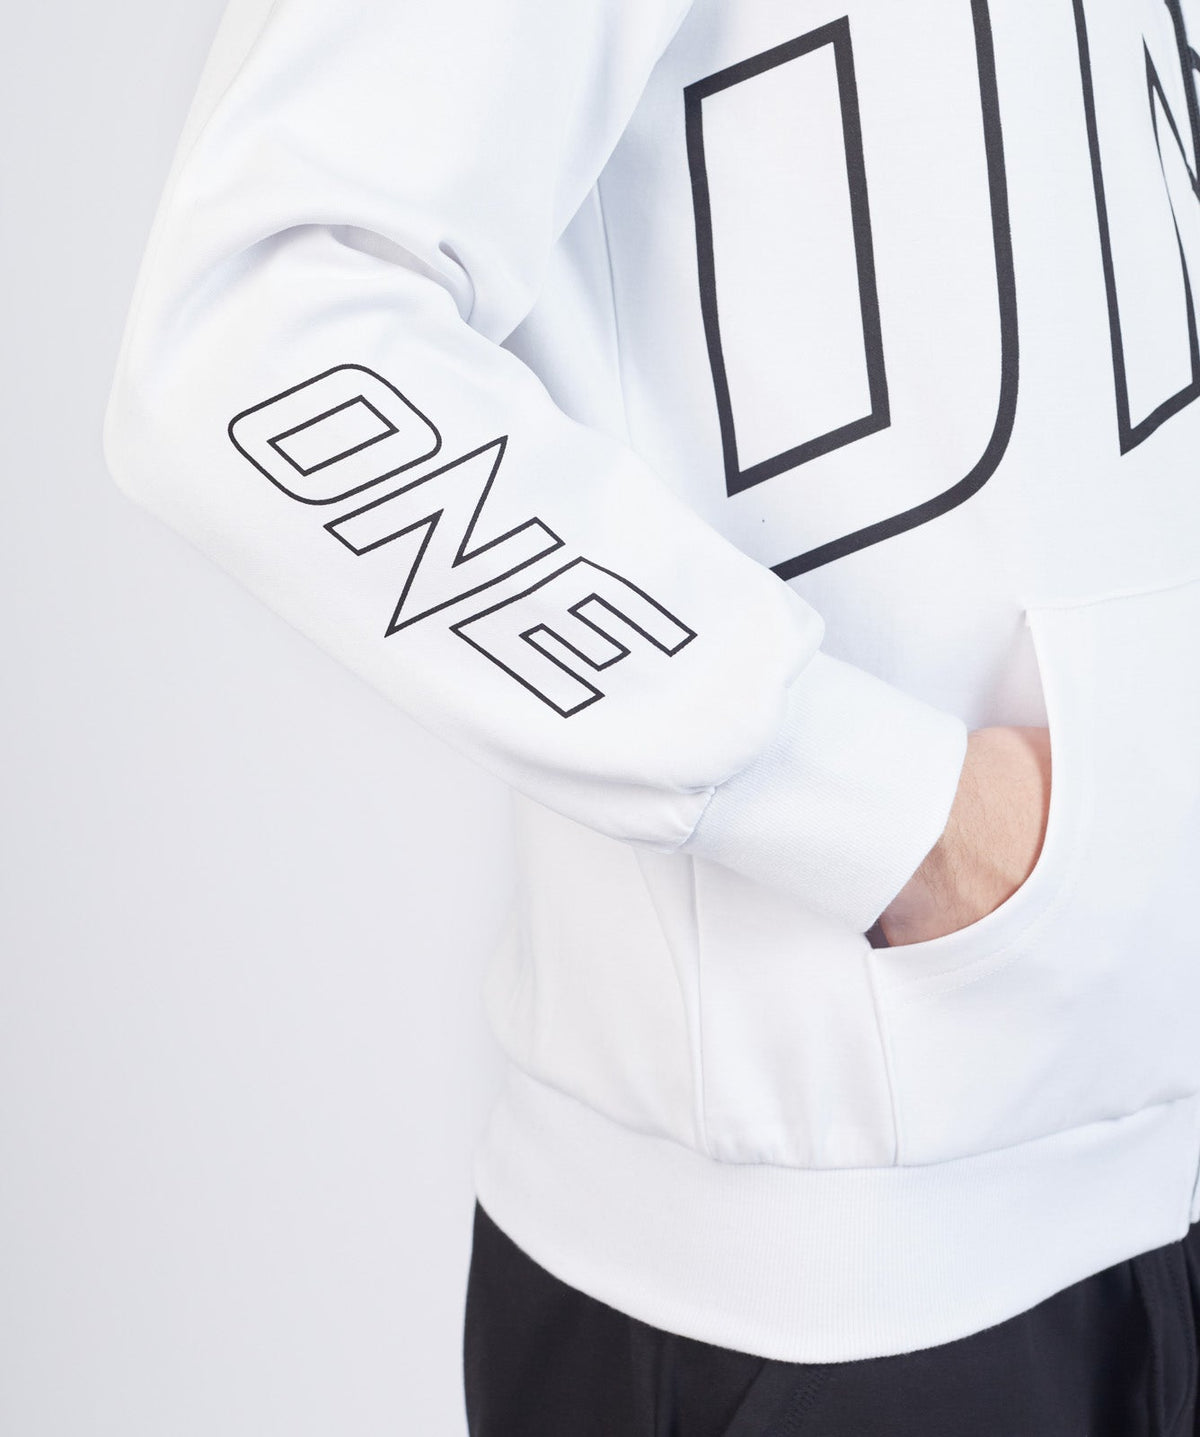 ONE Walkout Zip Hoodie (White), ONE Championship – ONE.SHOP Thailand